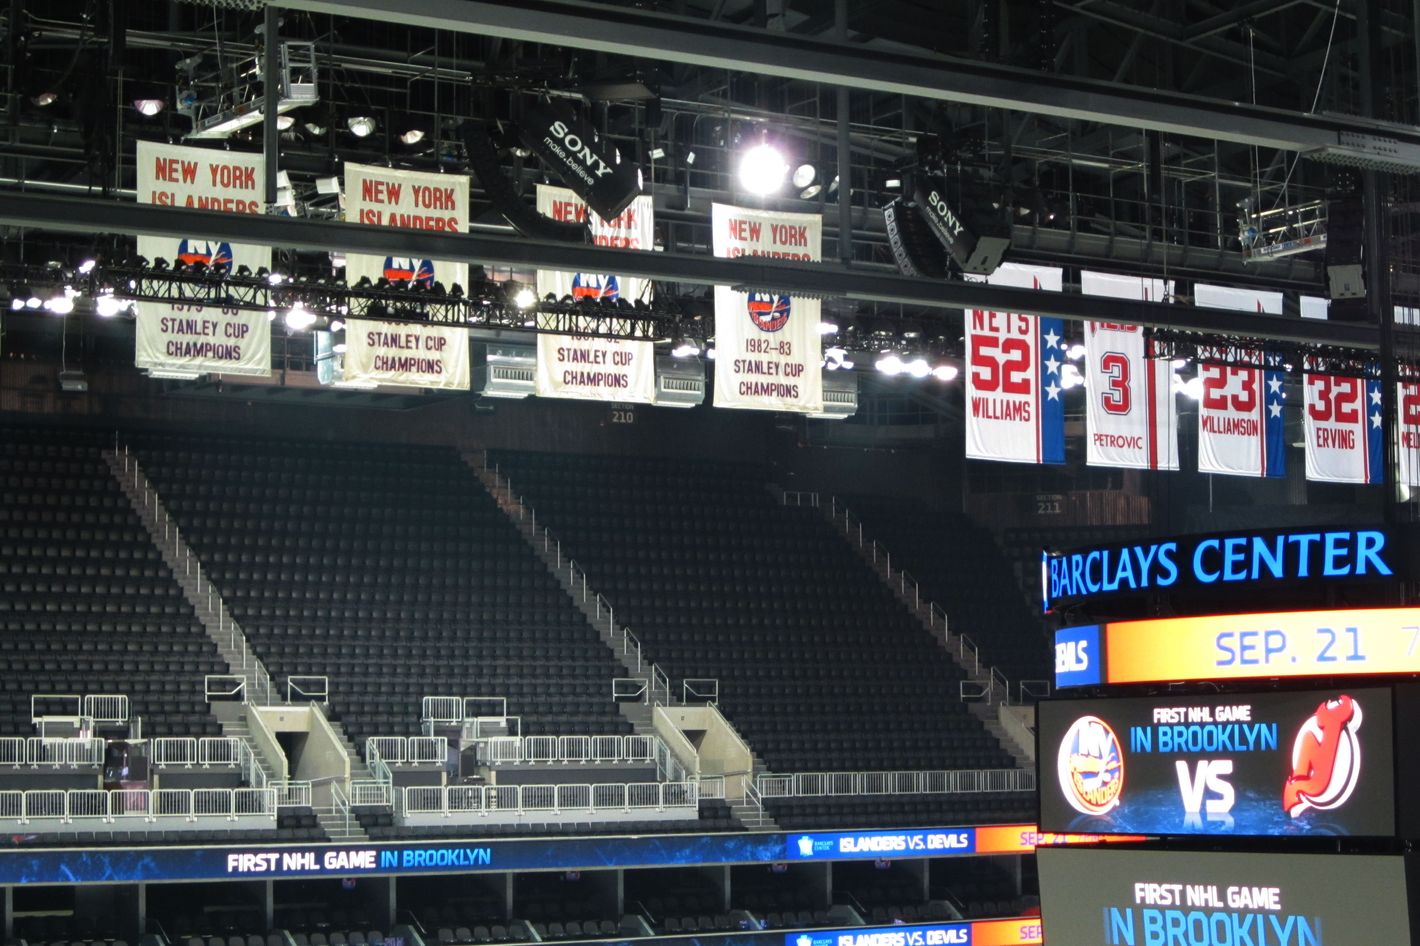 Barclays Center's rink layout shows it was not built for hockey – The  Brooklyn Game